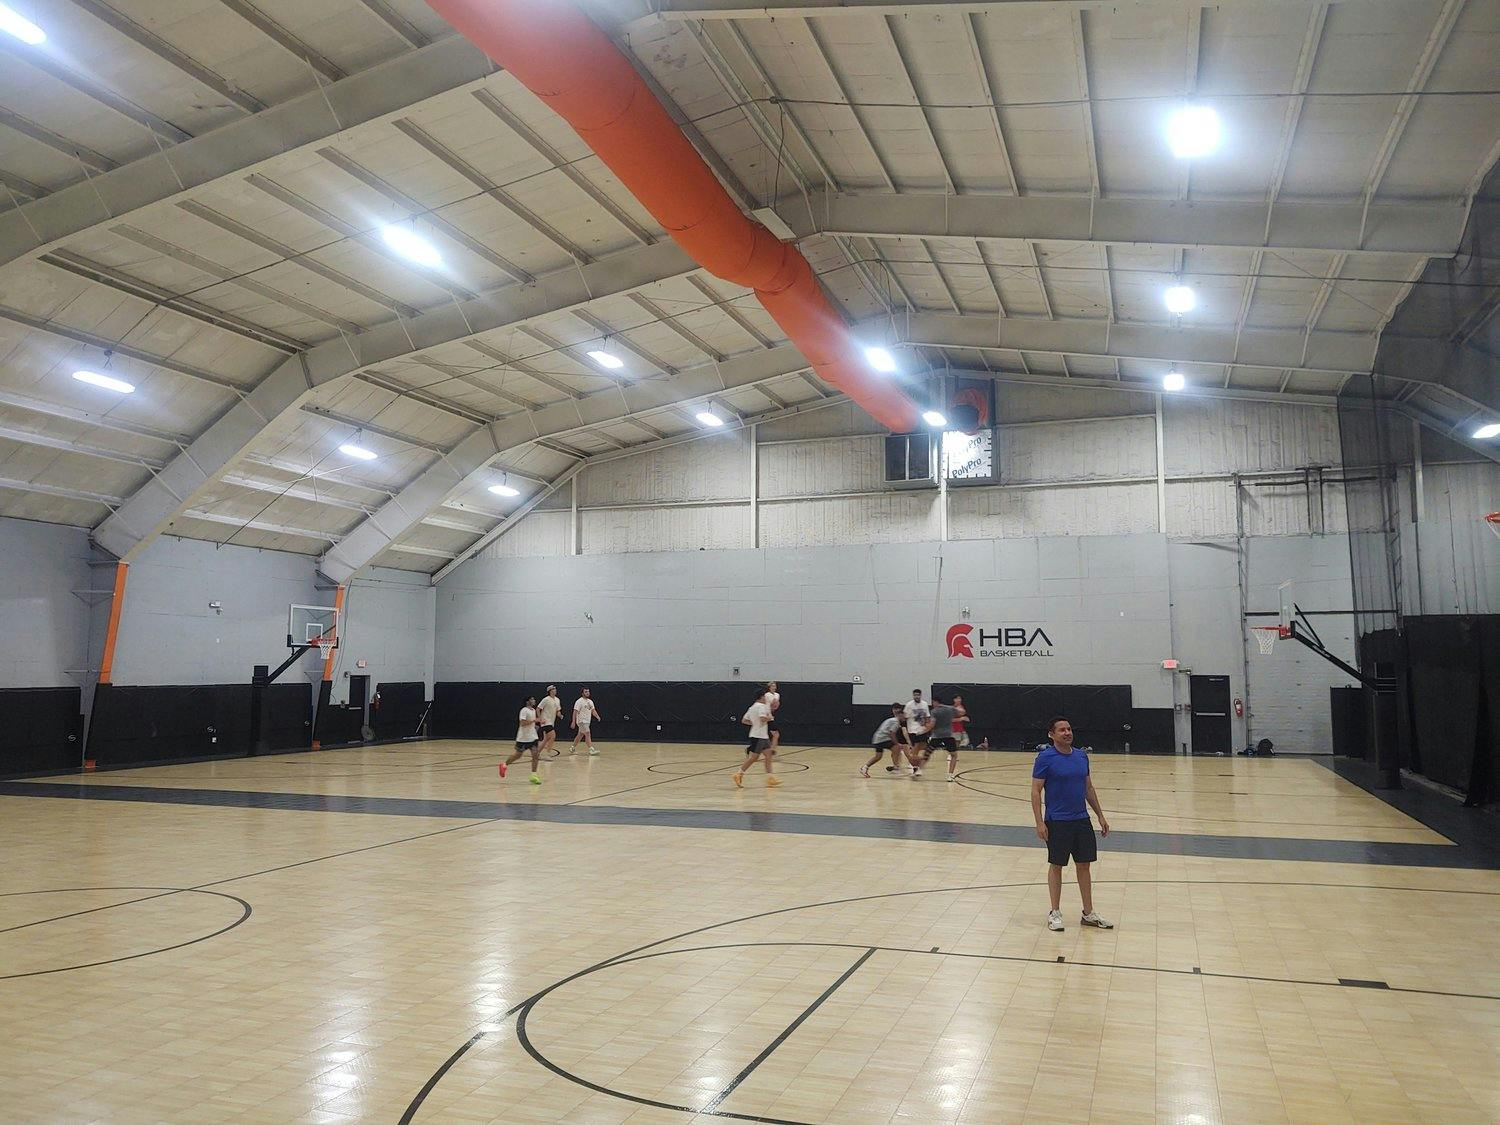 Image 7 of 10 of Nex Level Sports and Fitness court